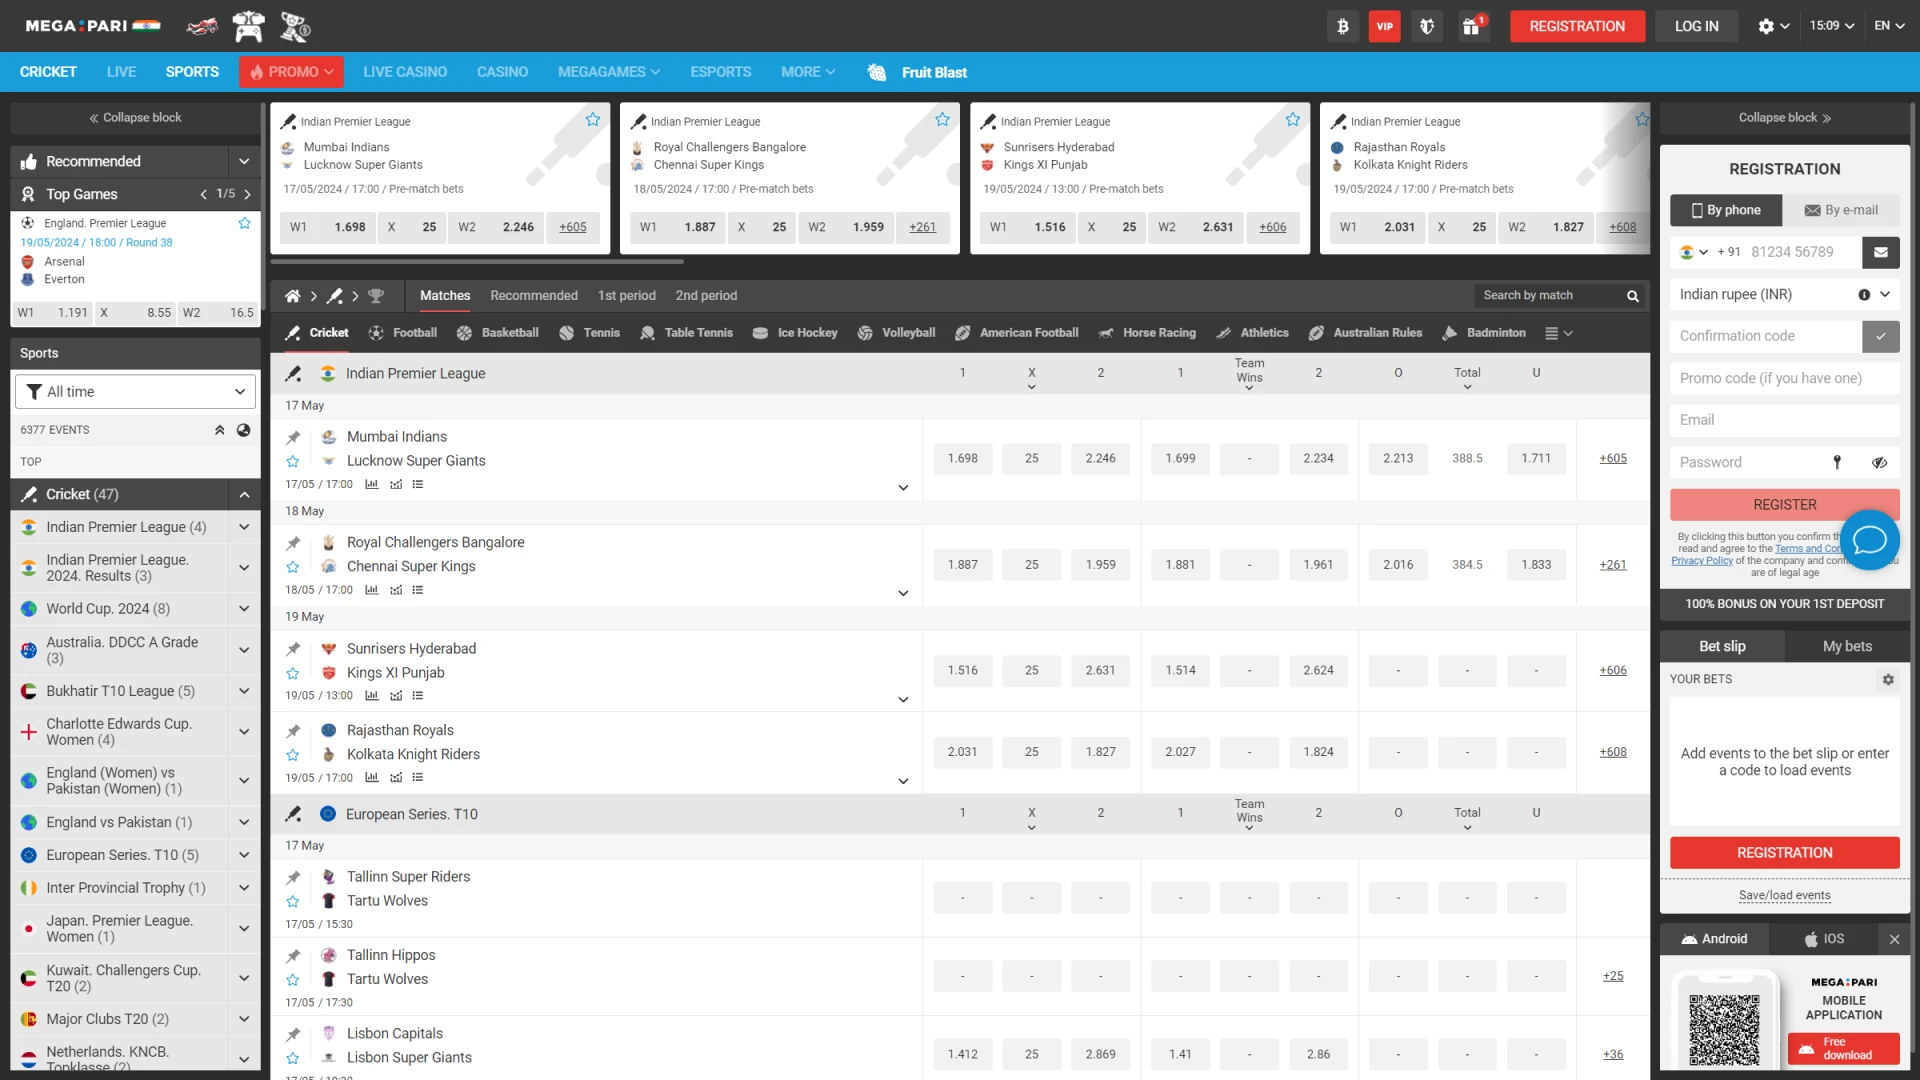 Screenshot of the cricket section on the Megapari site, which features a large selection of championships to bet on.